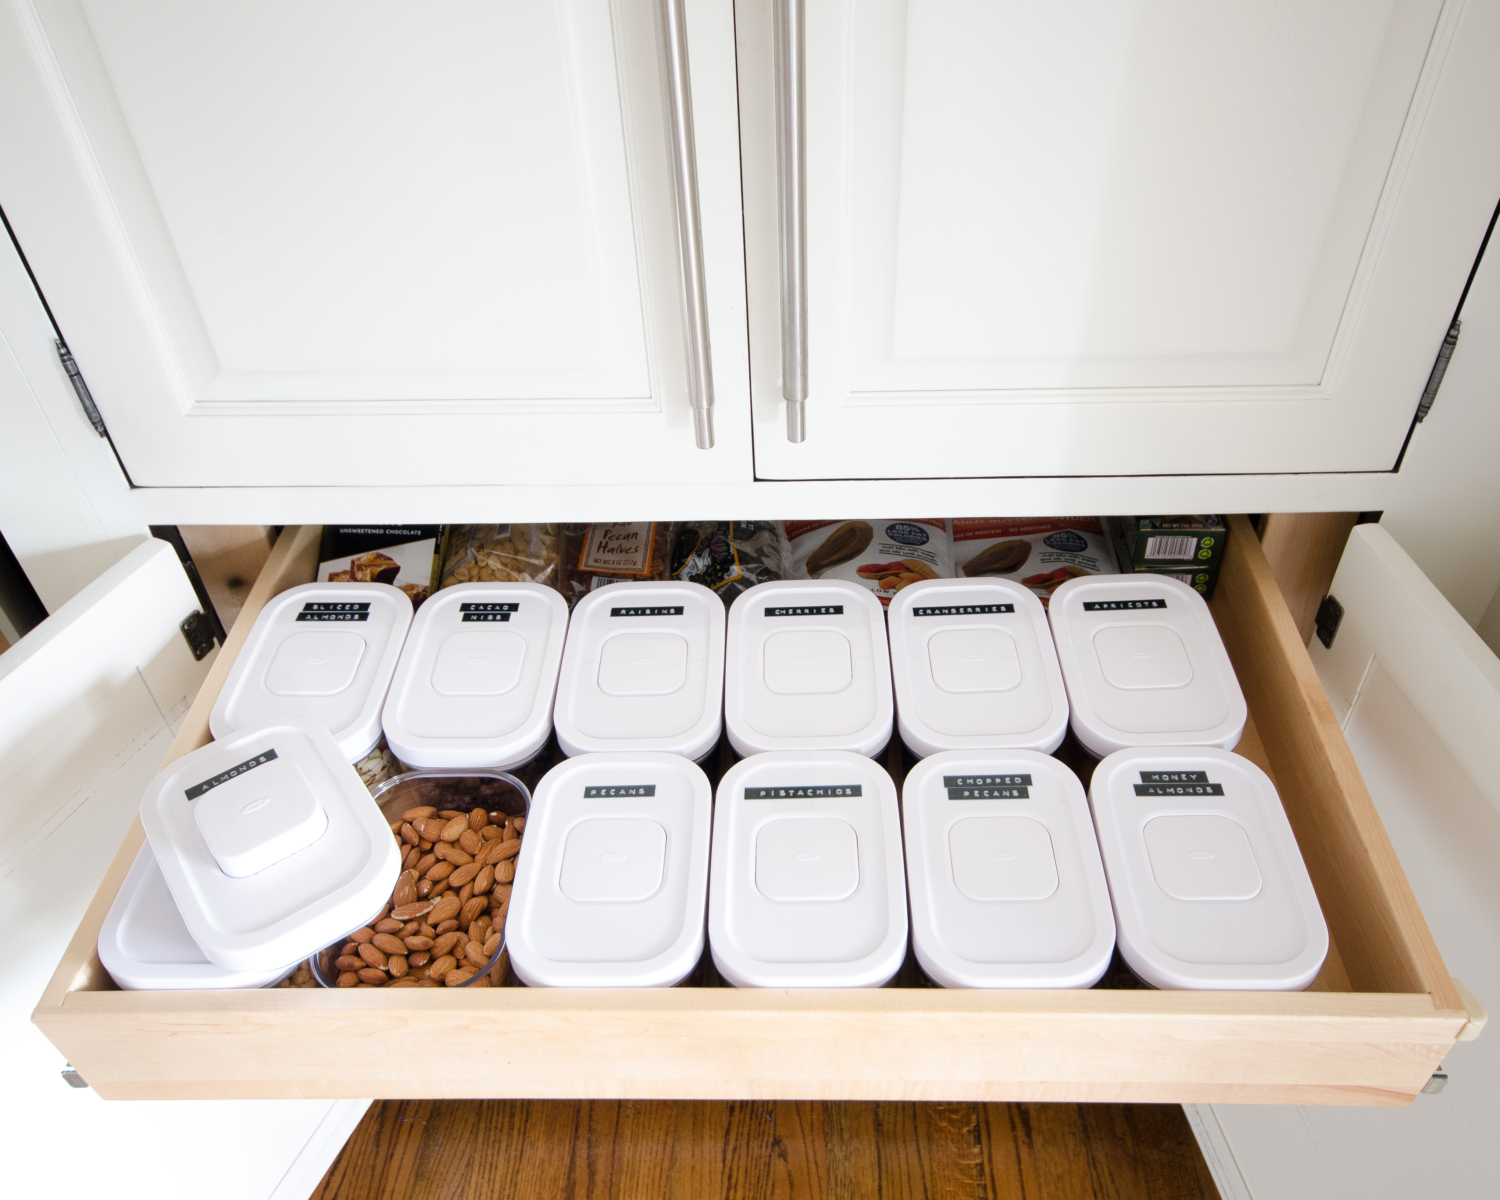 Effortless Kitchen Organization: Streamline Your Space with These